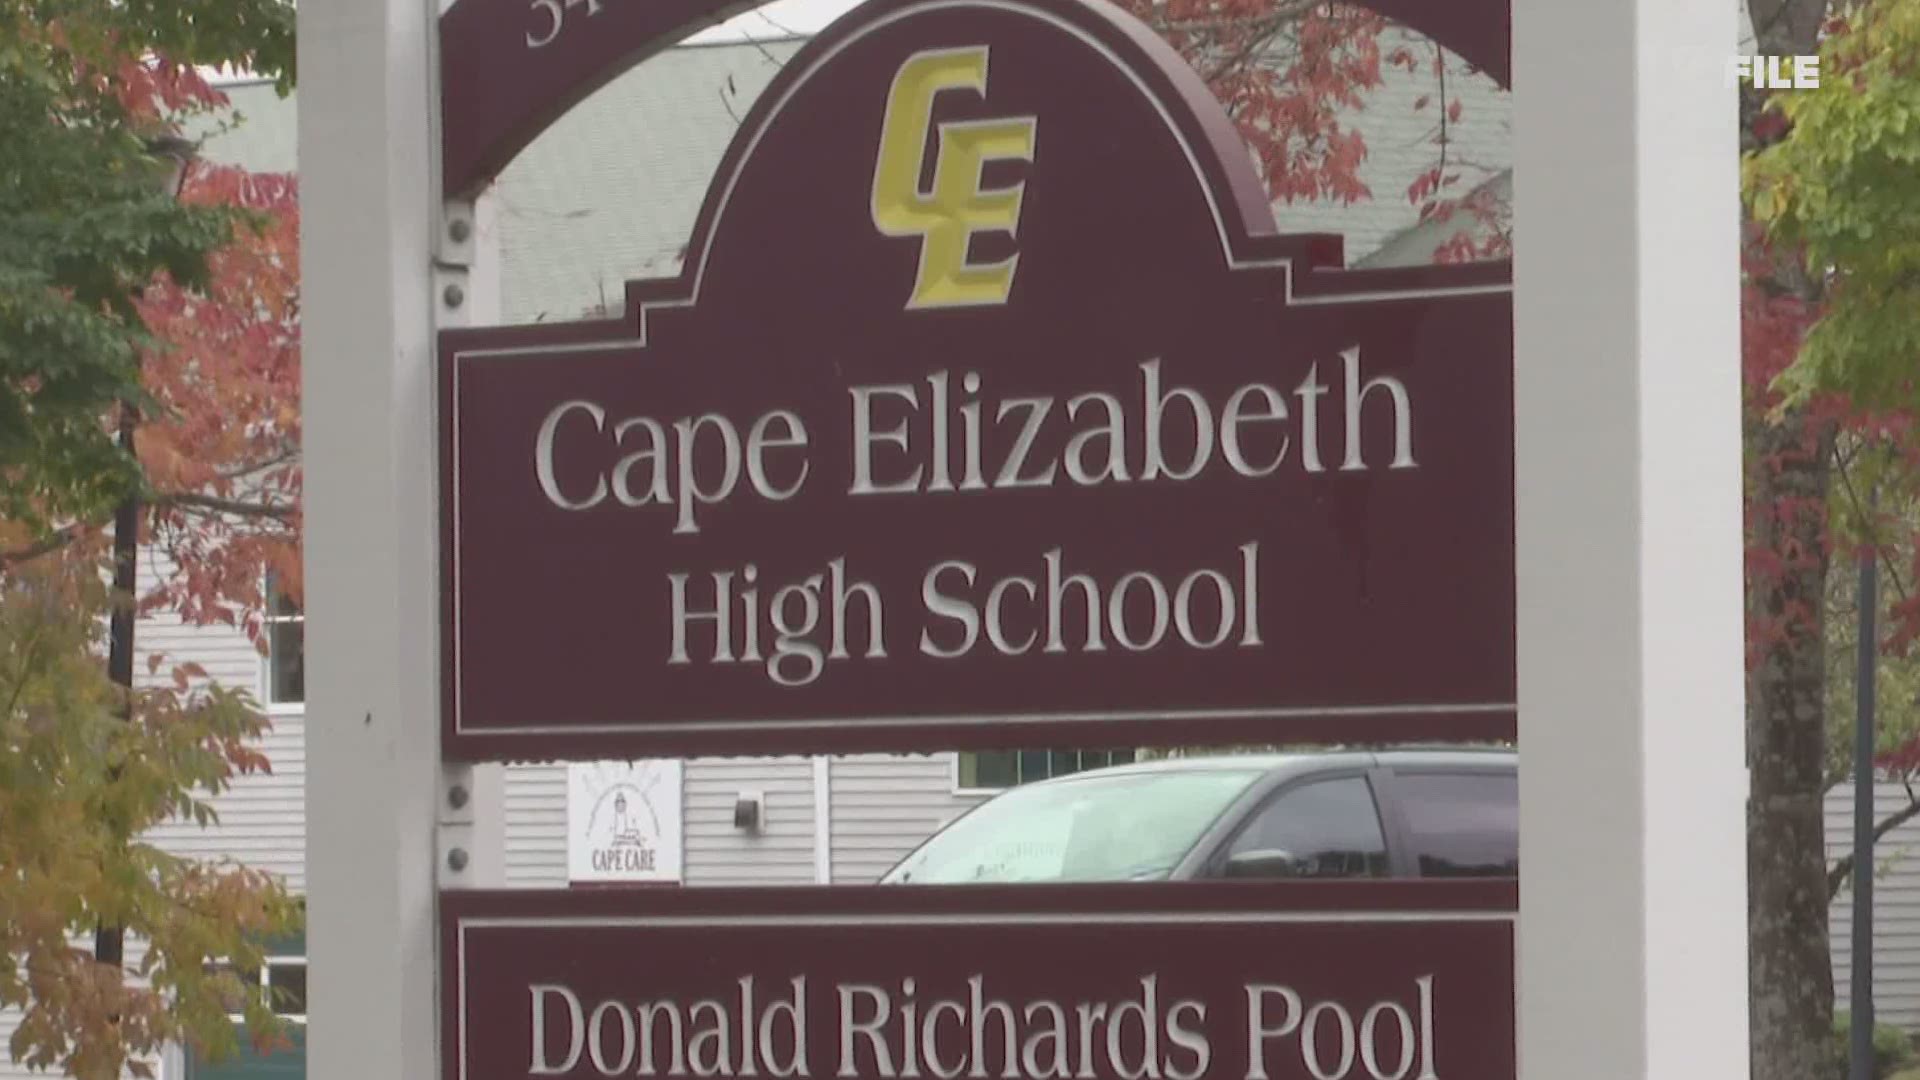 The decision by a lower court to block a Cape Elizabeth student's suspension from school has been affirmed by the U.S. Court of Appeals.